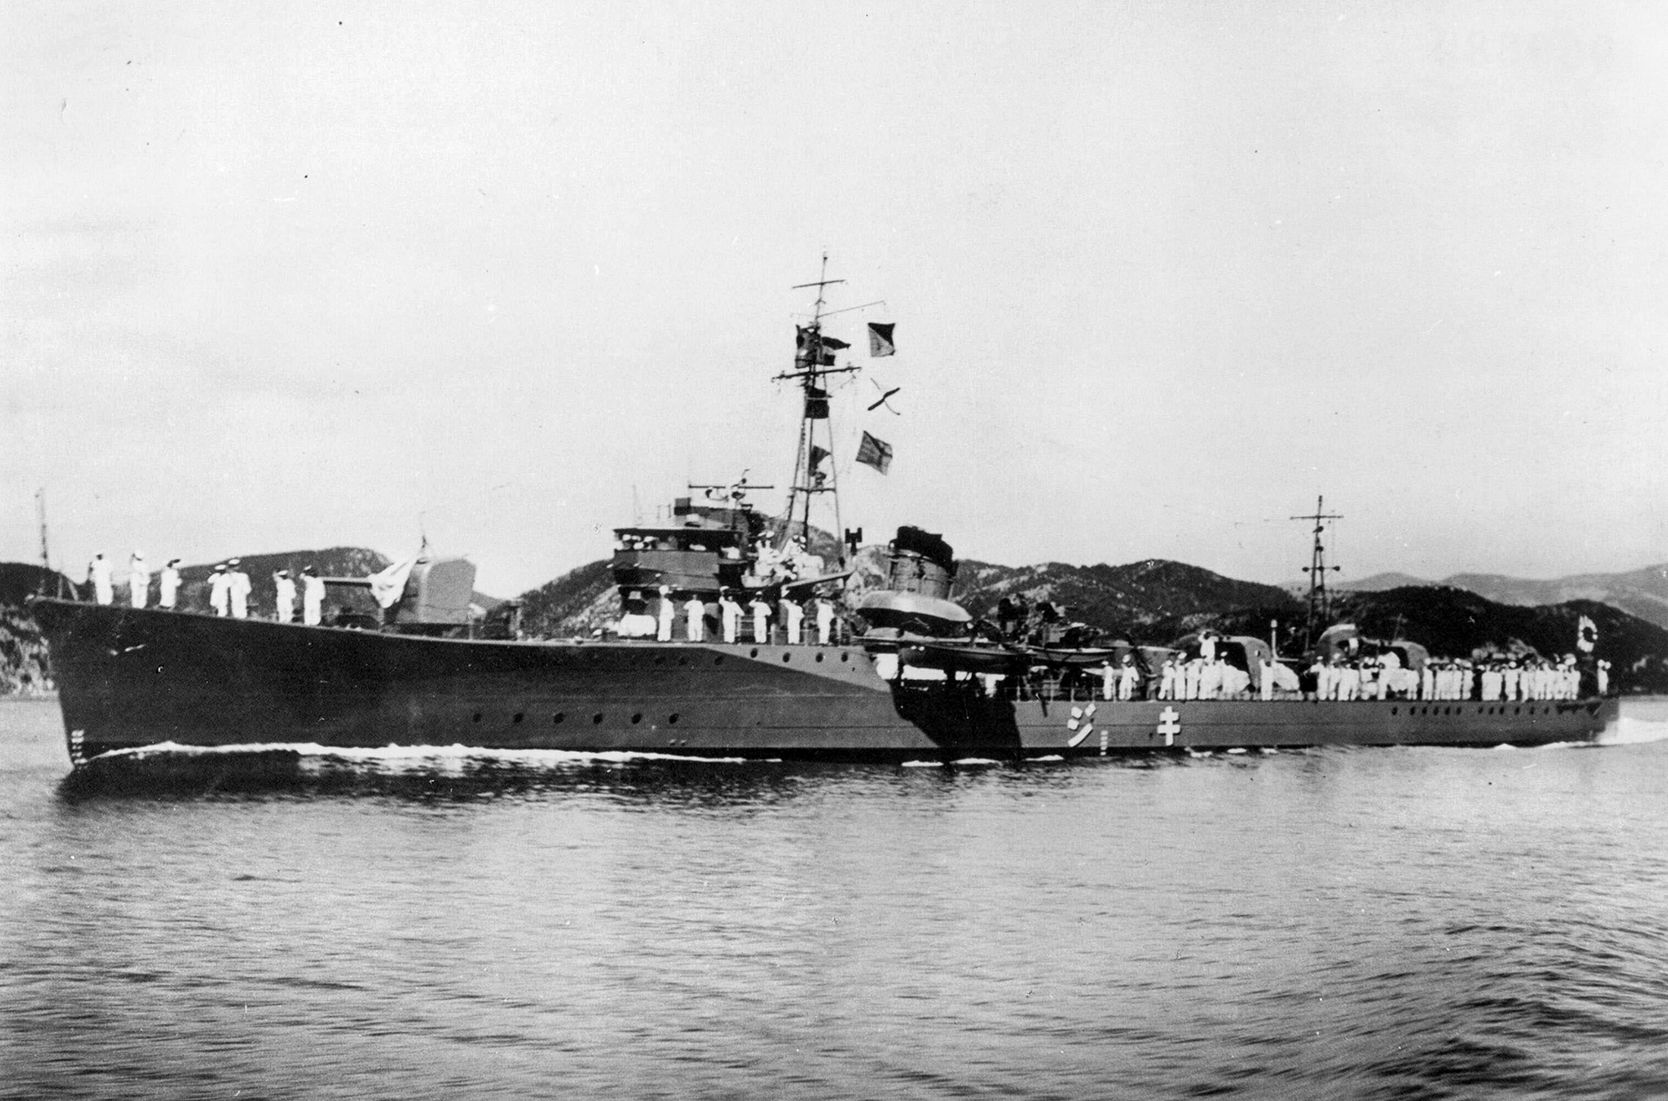 The Japanese torpedo boat Kiji was involved in the melee off Cebu on April 9, 1942, and was later surrendered to the Soviet Union at the end of World War II.